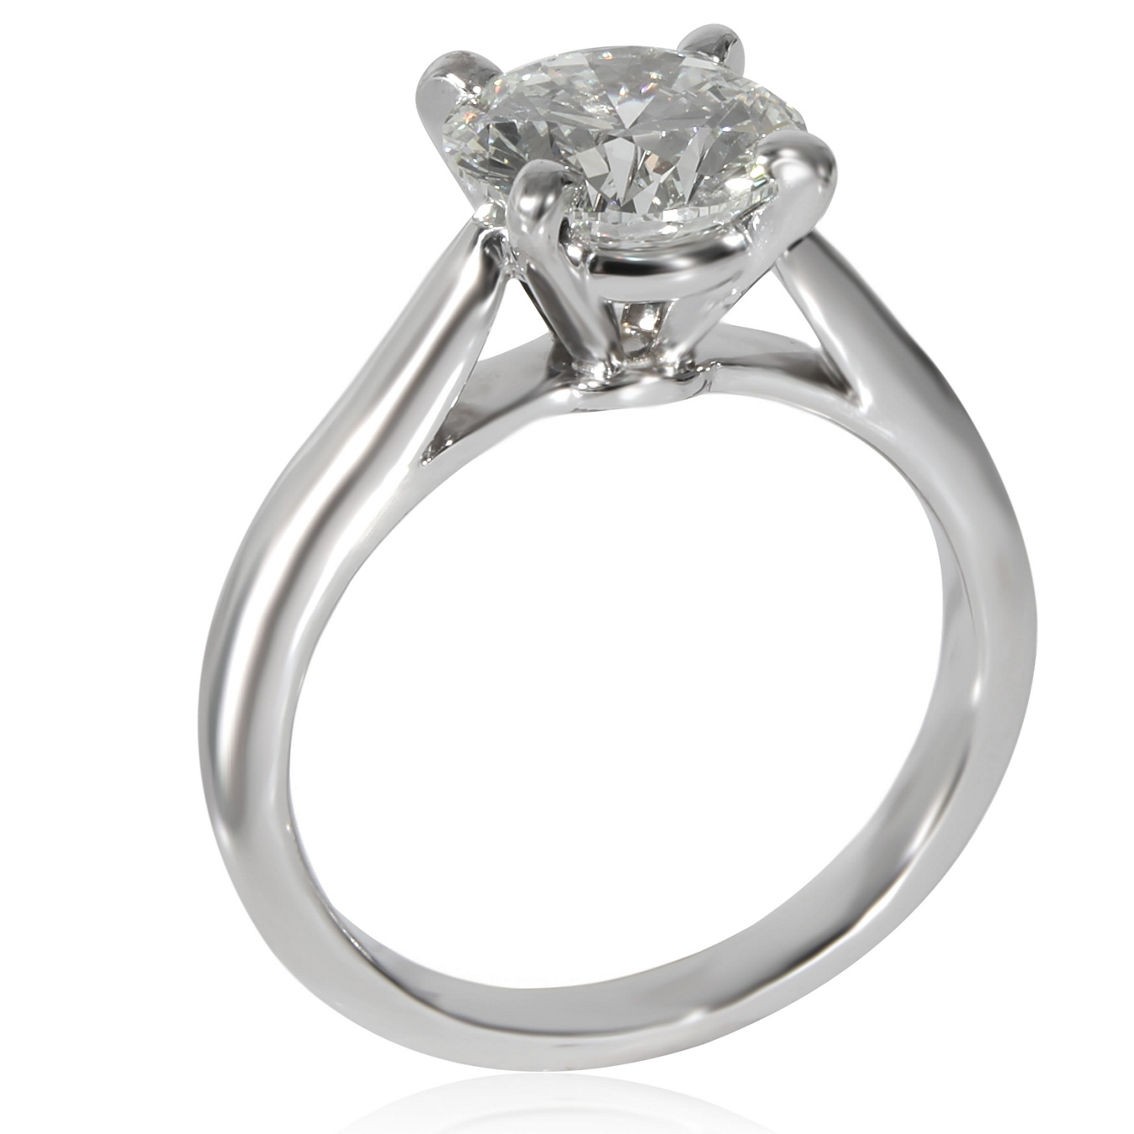 Cartier 1895 Diamond Solitaire Engagement Ring in Platinum 1.8 CTW Pre-Owned - Image 3 of 3